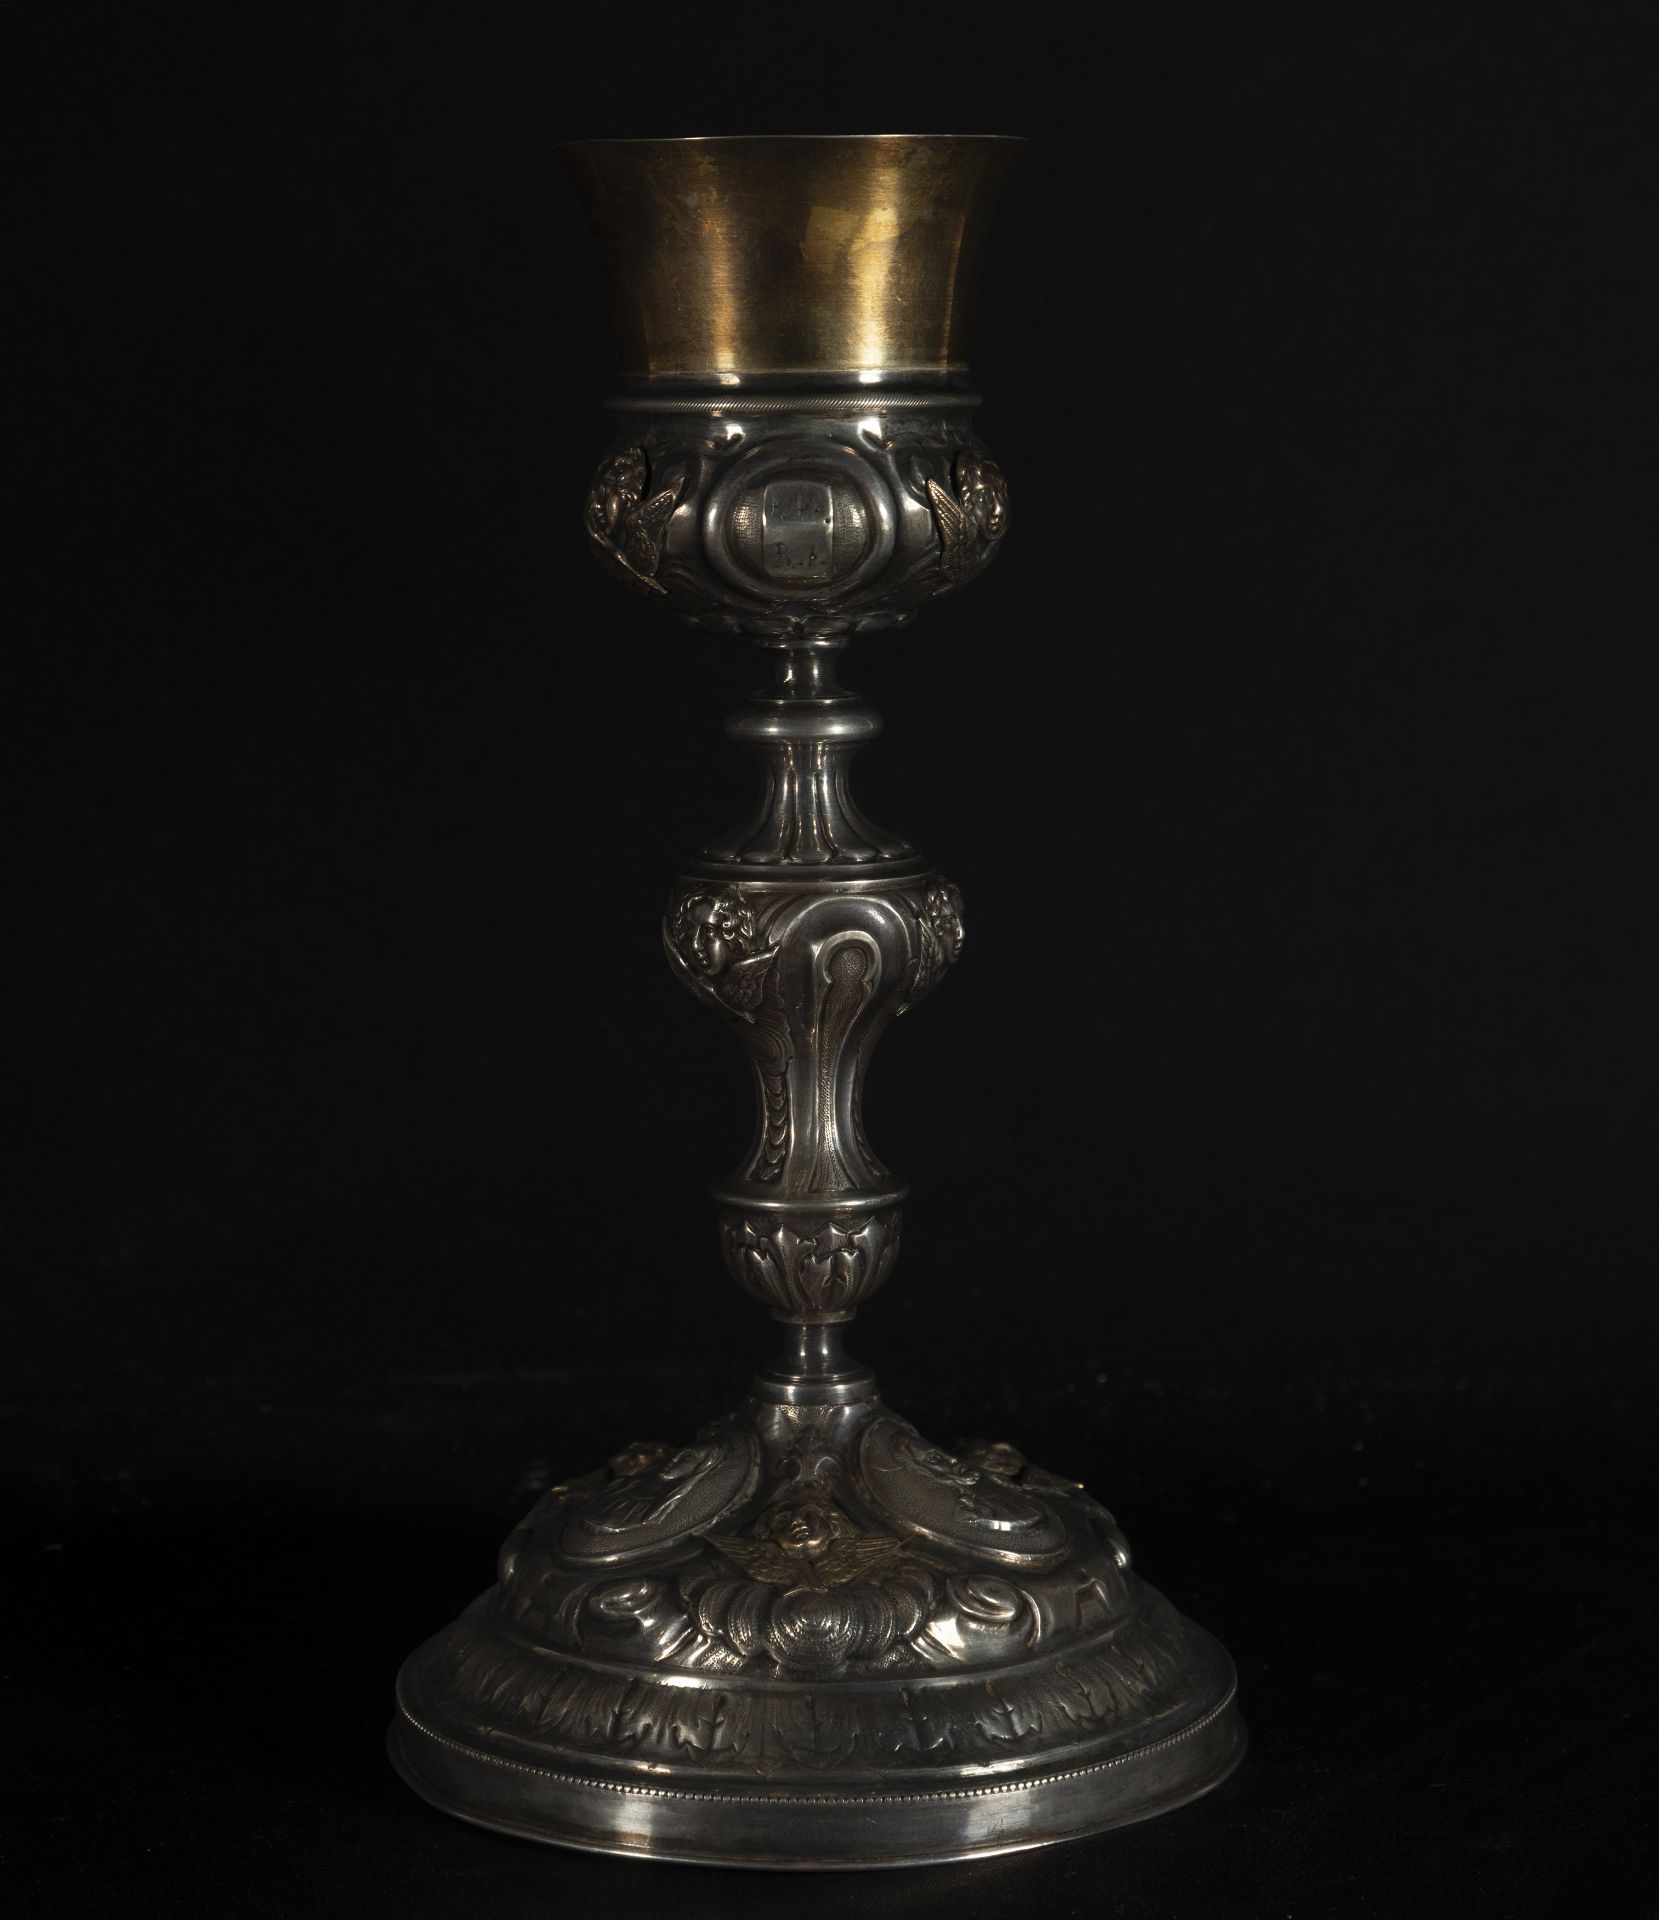 Goblet in 925 Sterling silver and Vermeil, hallmarks from Barcelona and Platero Casas marks, 19th ce